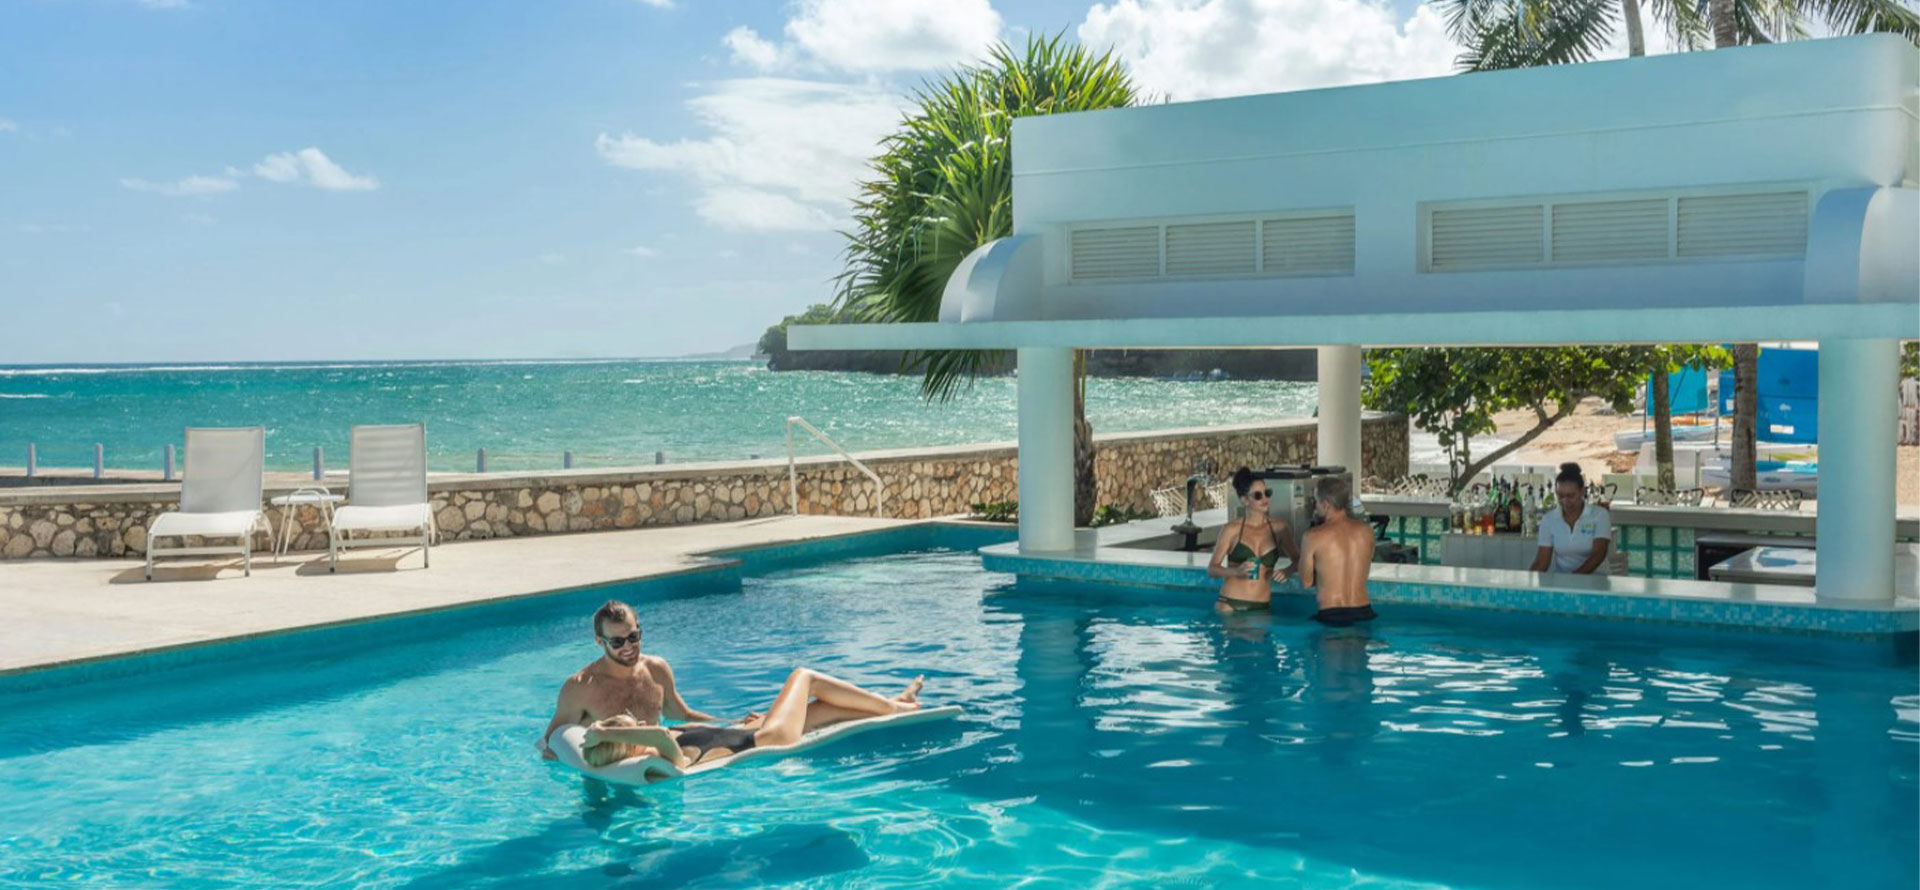 Us virgin islands all-inclusive resort adults-only with swimming pool.